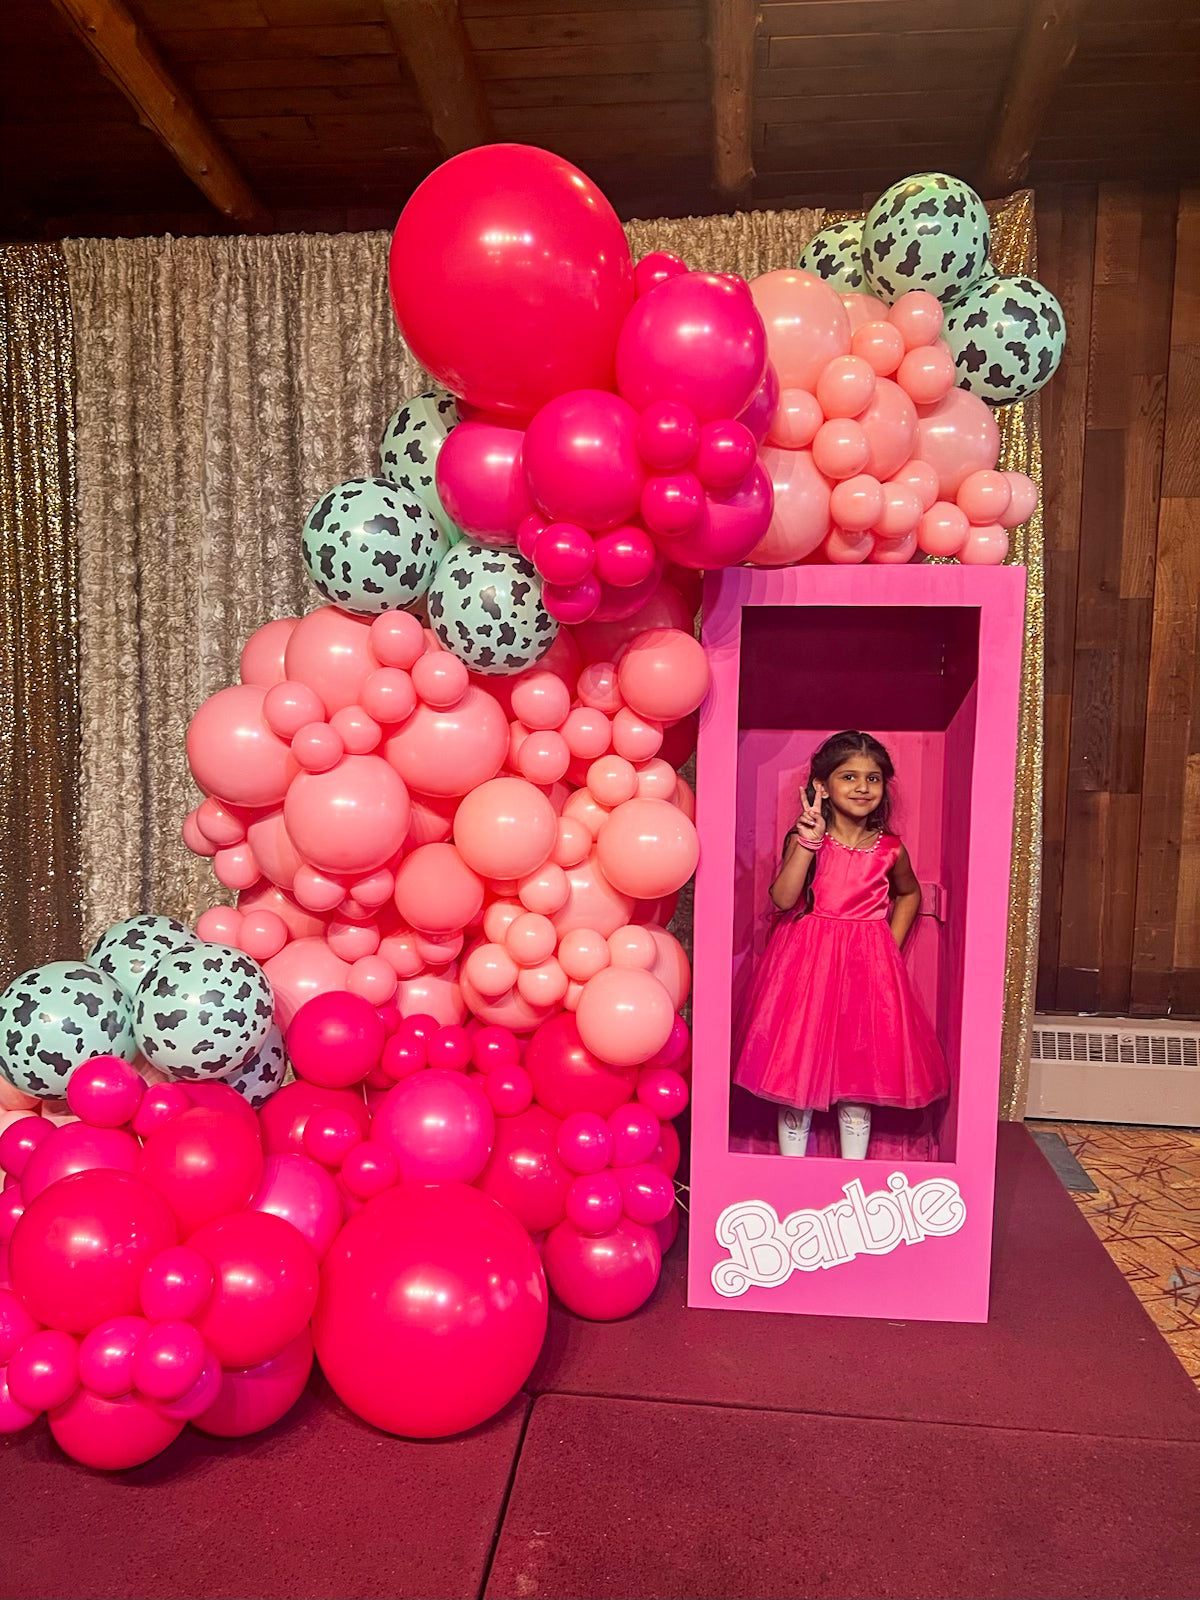 5 Foot Tall Barbie Box with Balloons